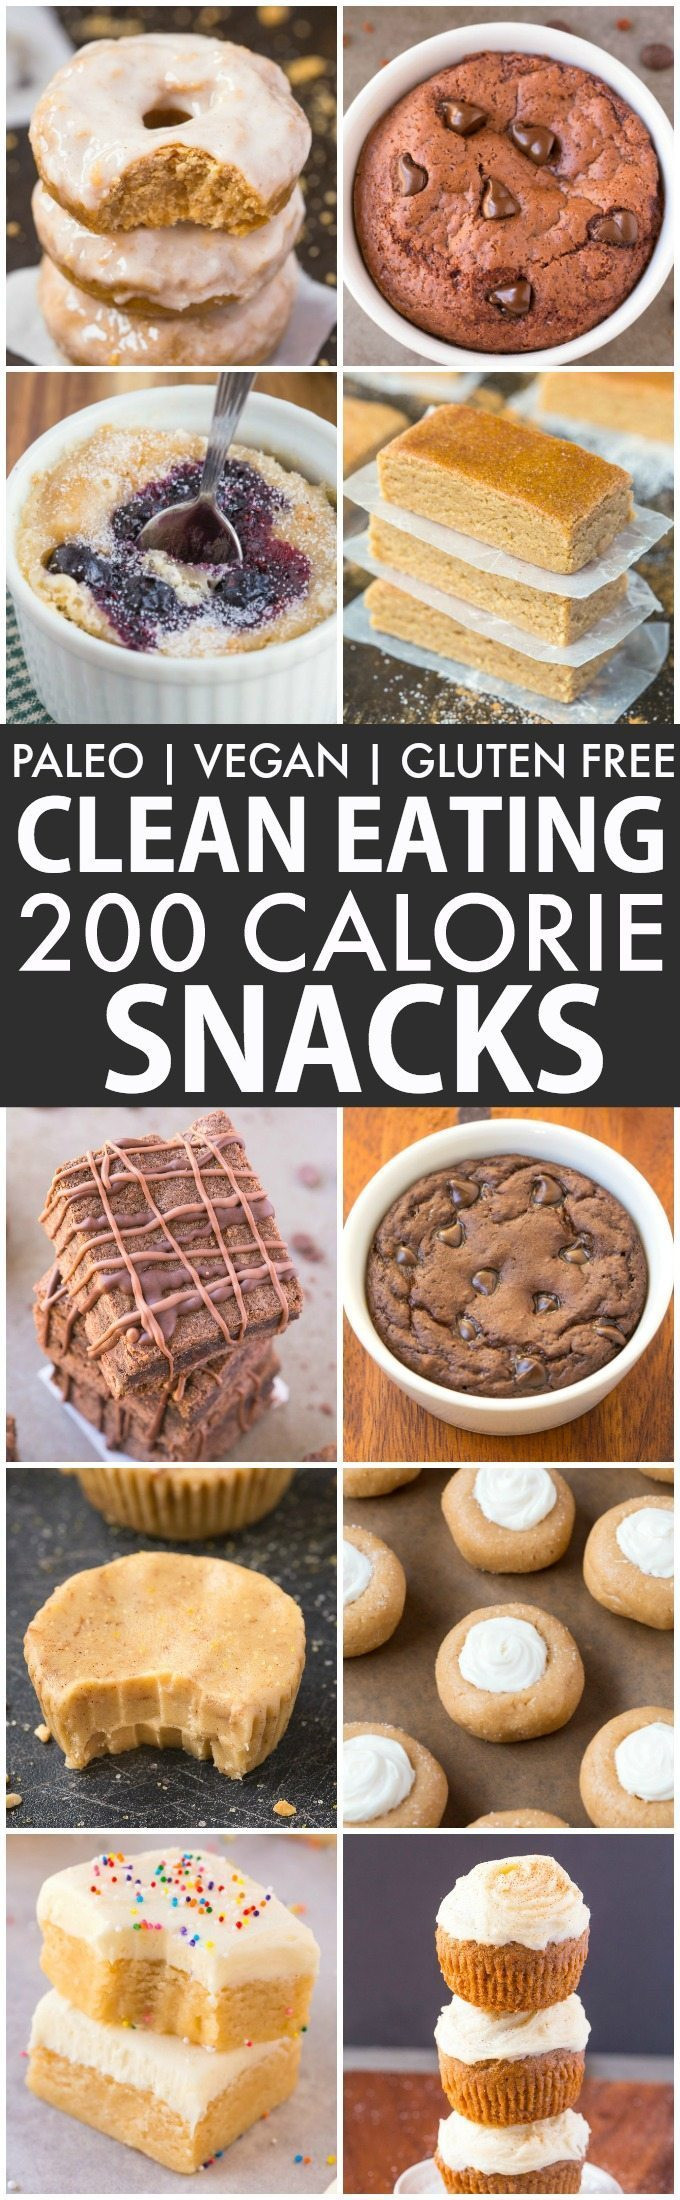 Healthy And Filling Snacks
 15 Healthy Desserts and Snacks Under 200 Calories